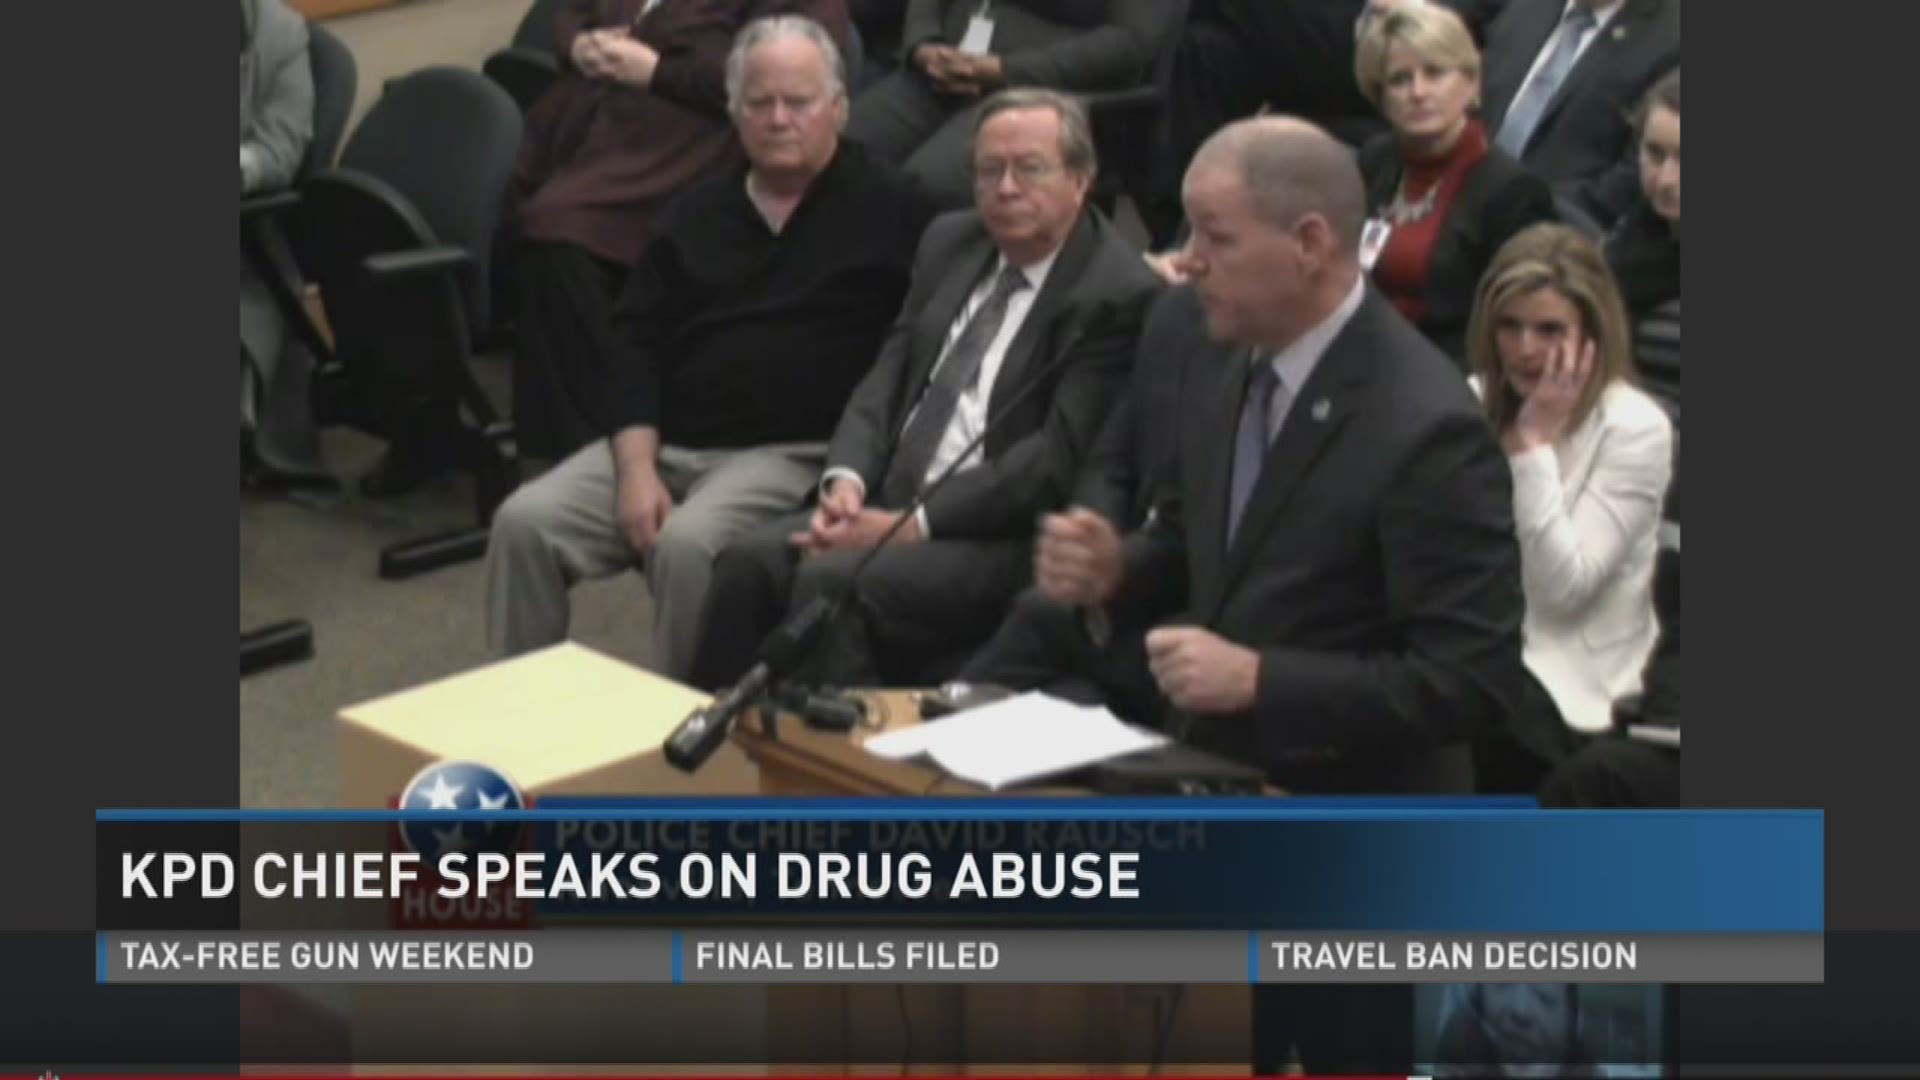 Feb. 9, 2017: Knoxville Police Chief David Rausch testified before an opioid abuse taskforce at the state capitol.